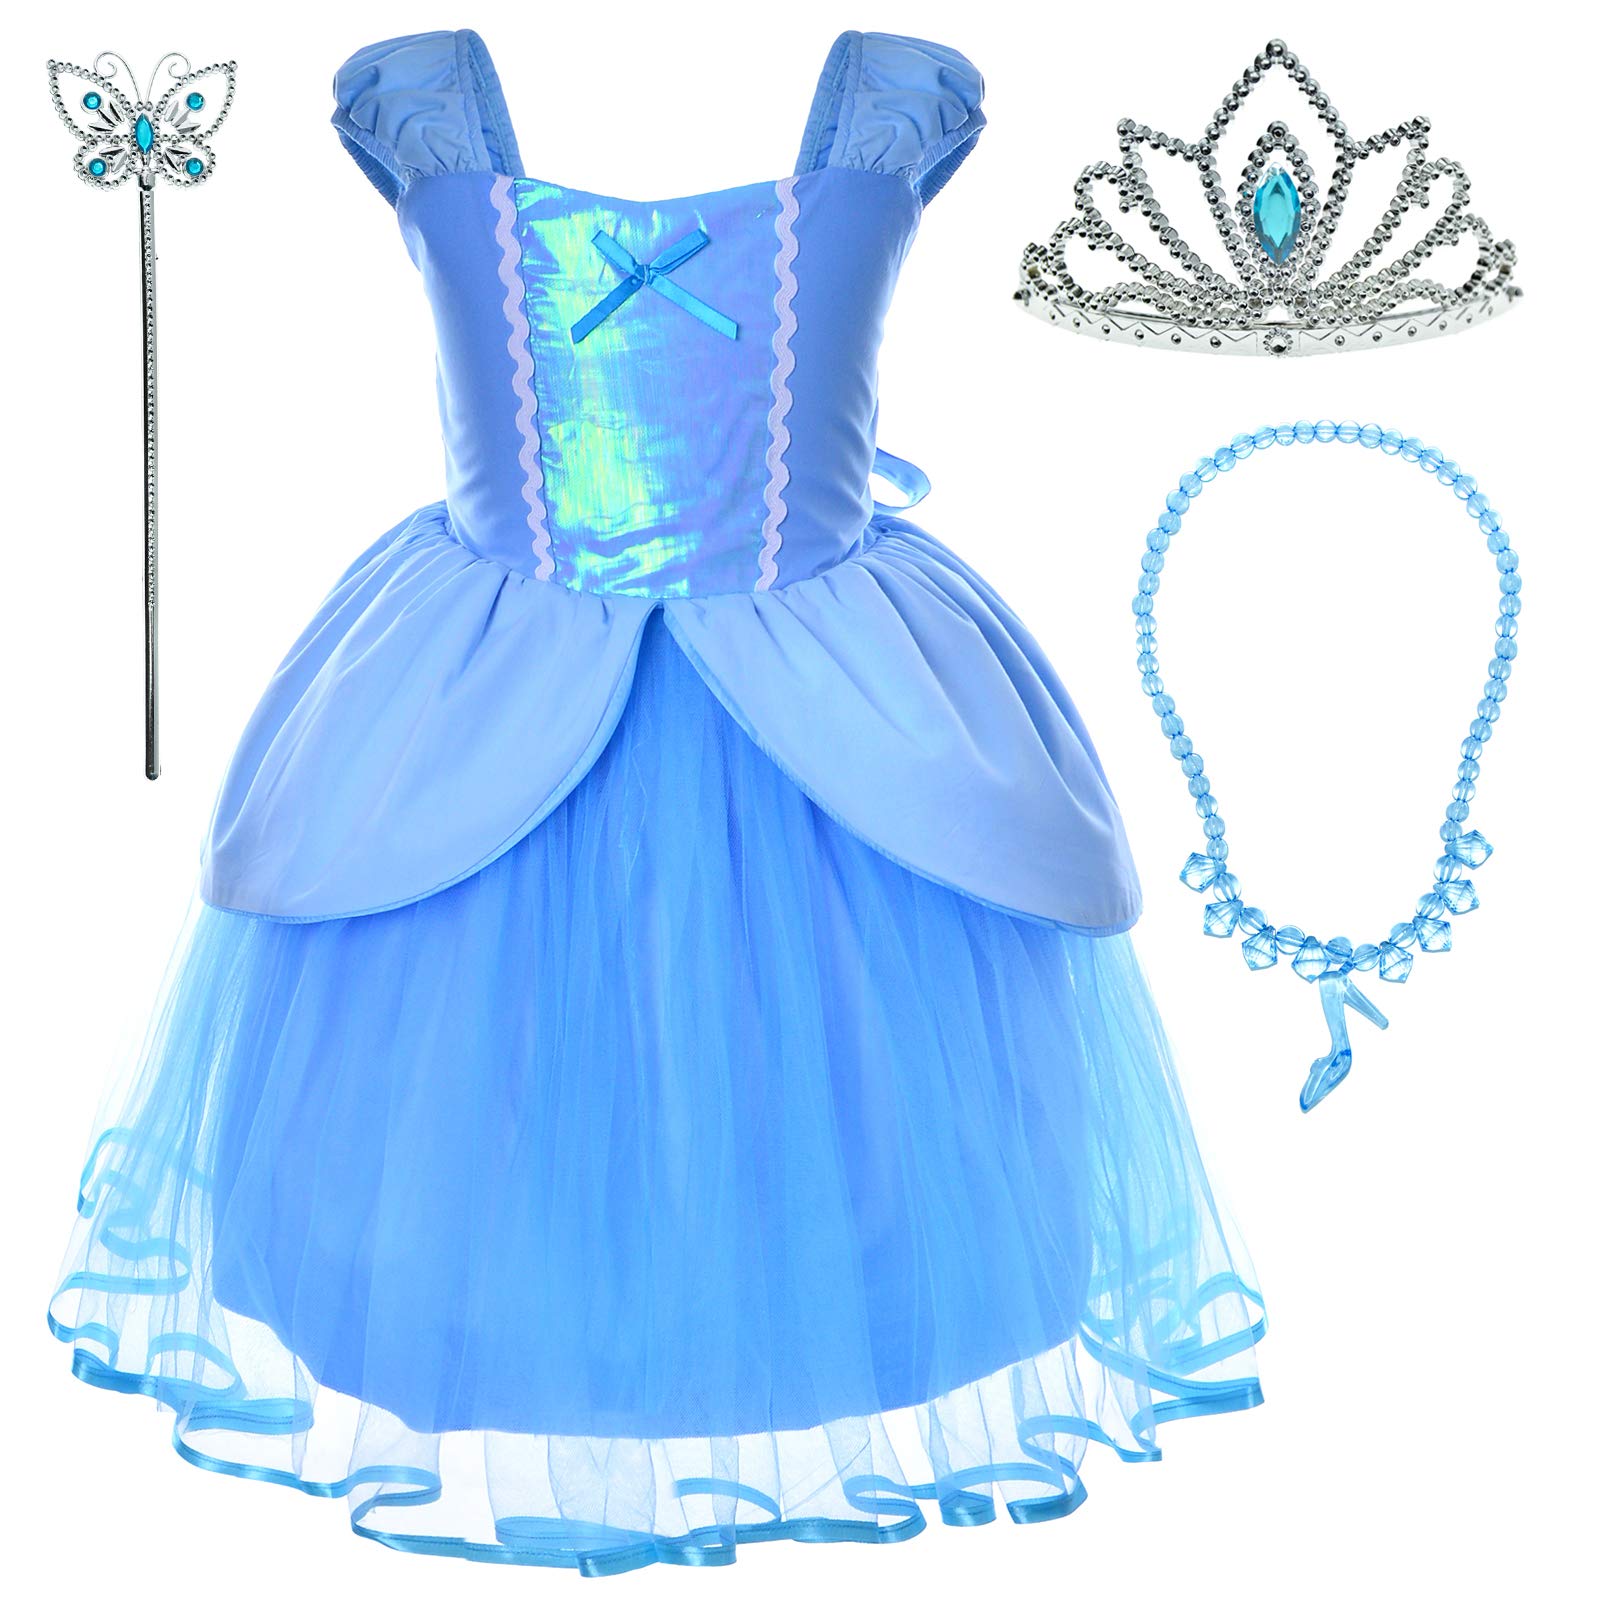 Little Girls Princess Costume for Birthday Party with Headband